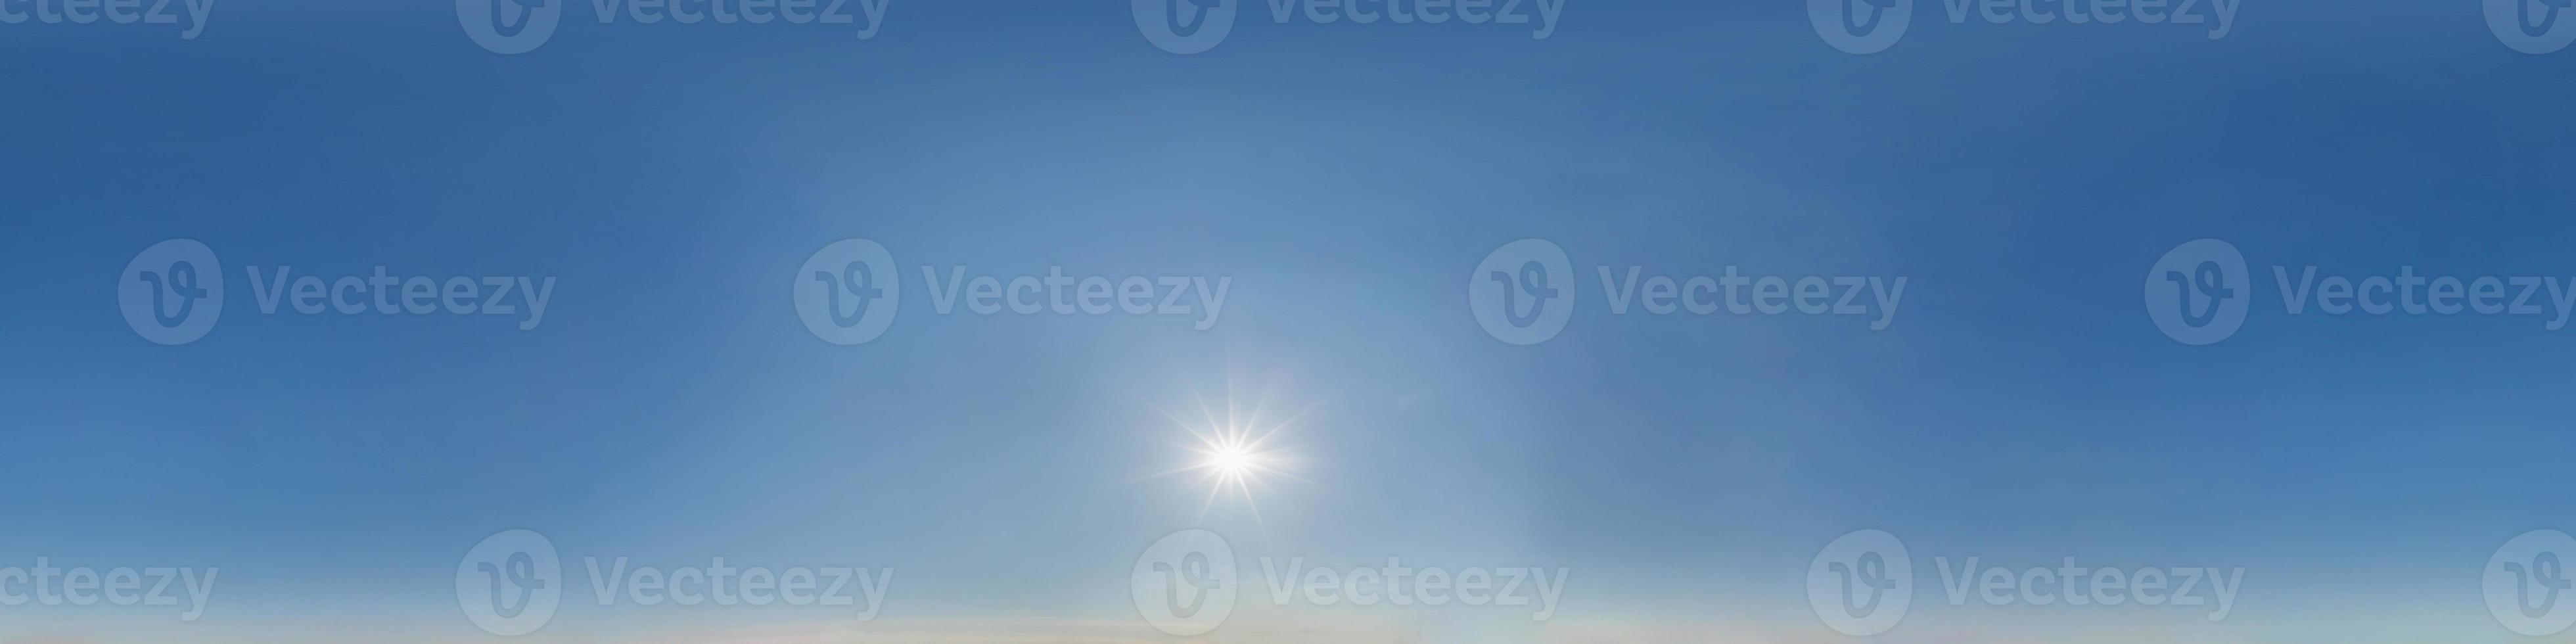 clear blue sky with scorching sun. Seamless hdri panorama 360 degrees angle view with zenith for use in 3d graphics or game development as sky dome or edit drone shot photo